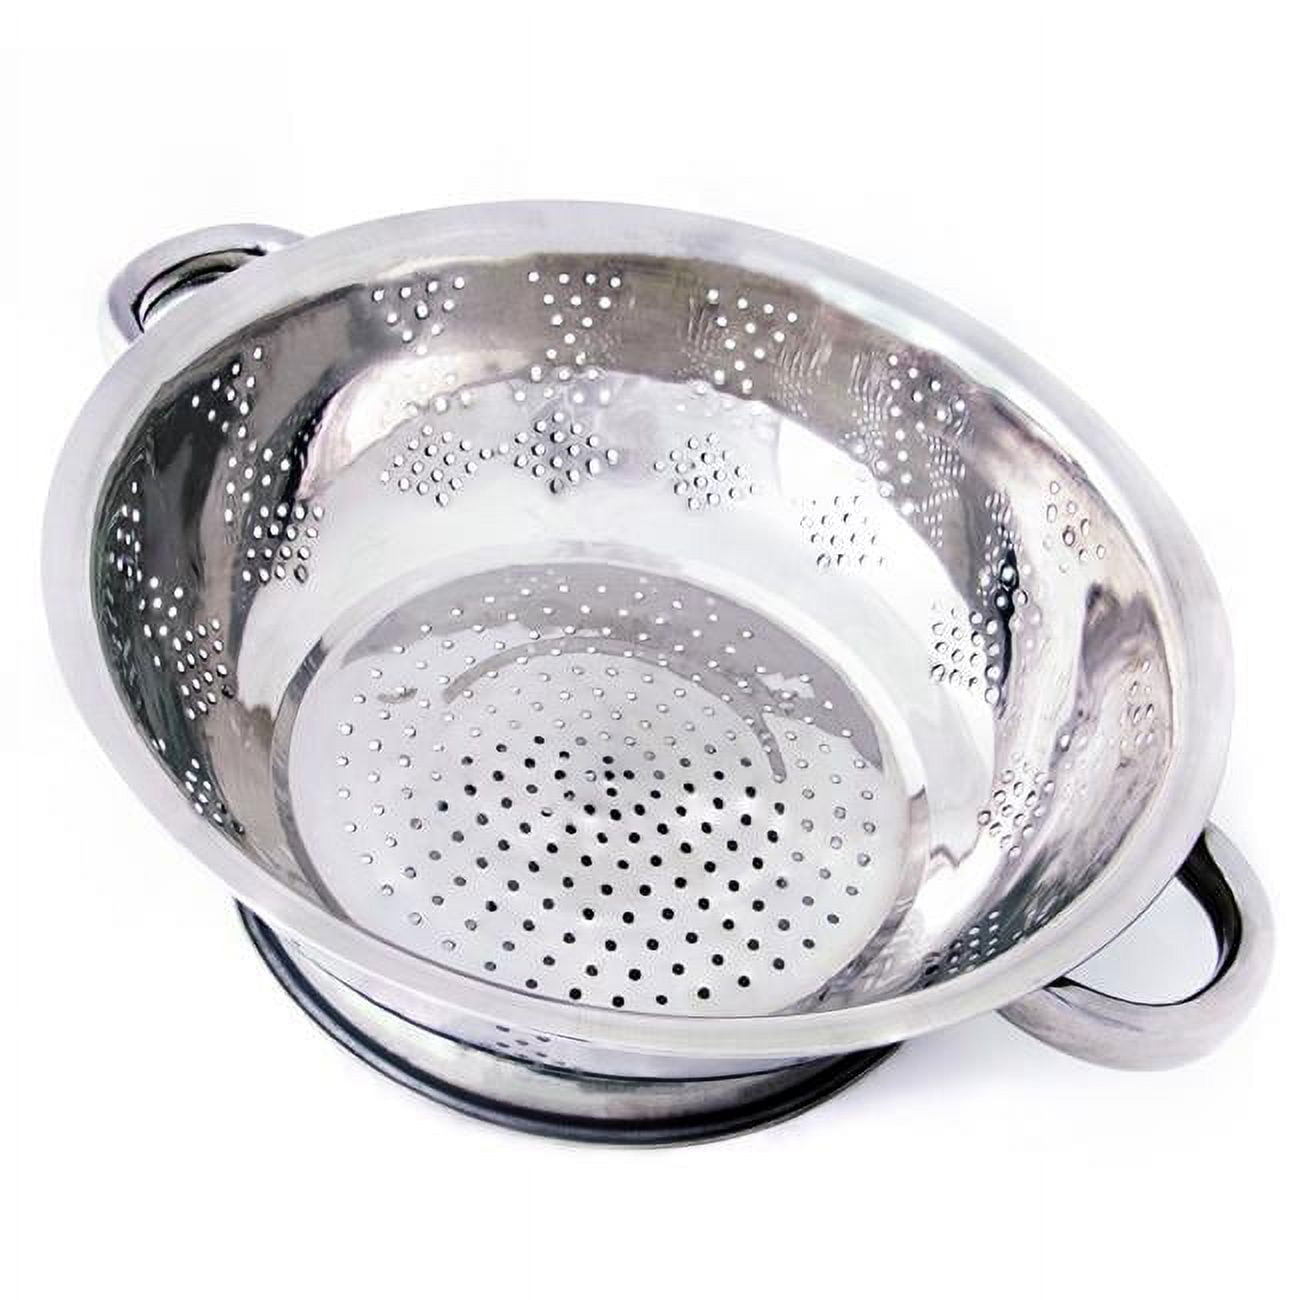 Picture of Brybelly KCOL-003 Stainless Steel Colander - 4 qt